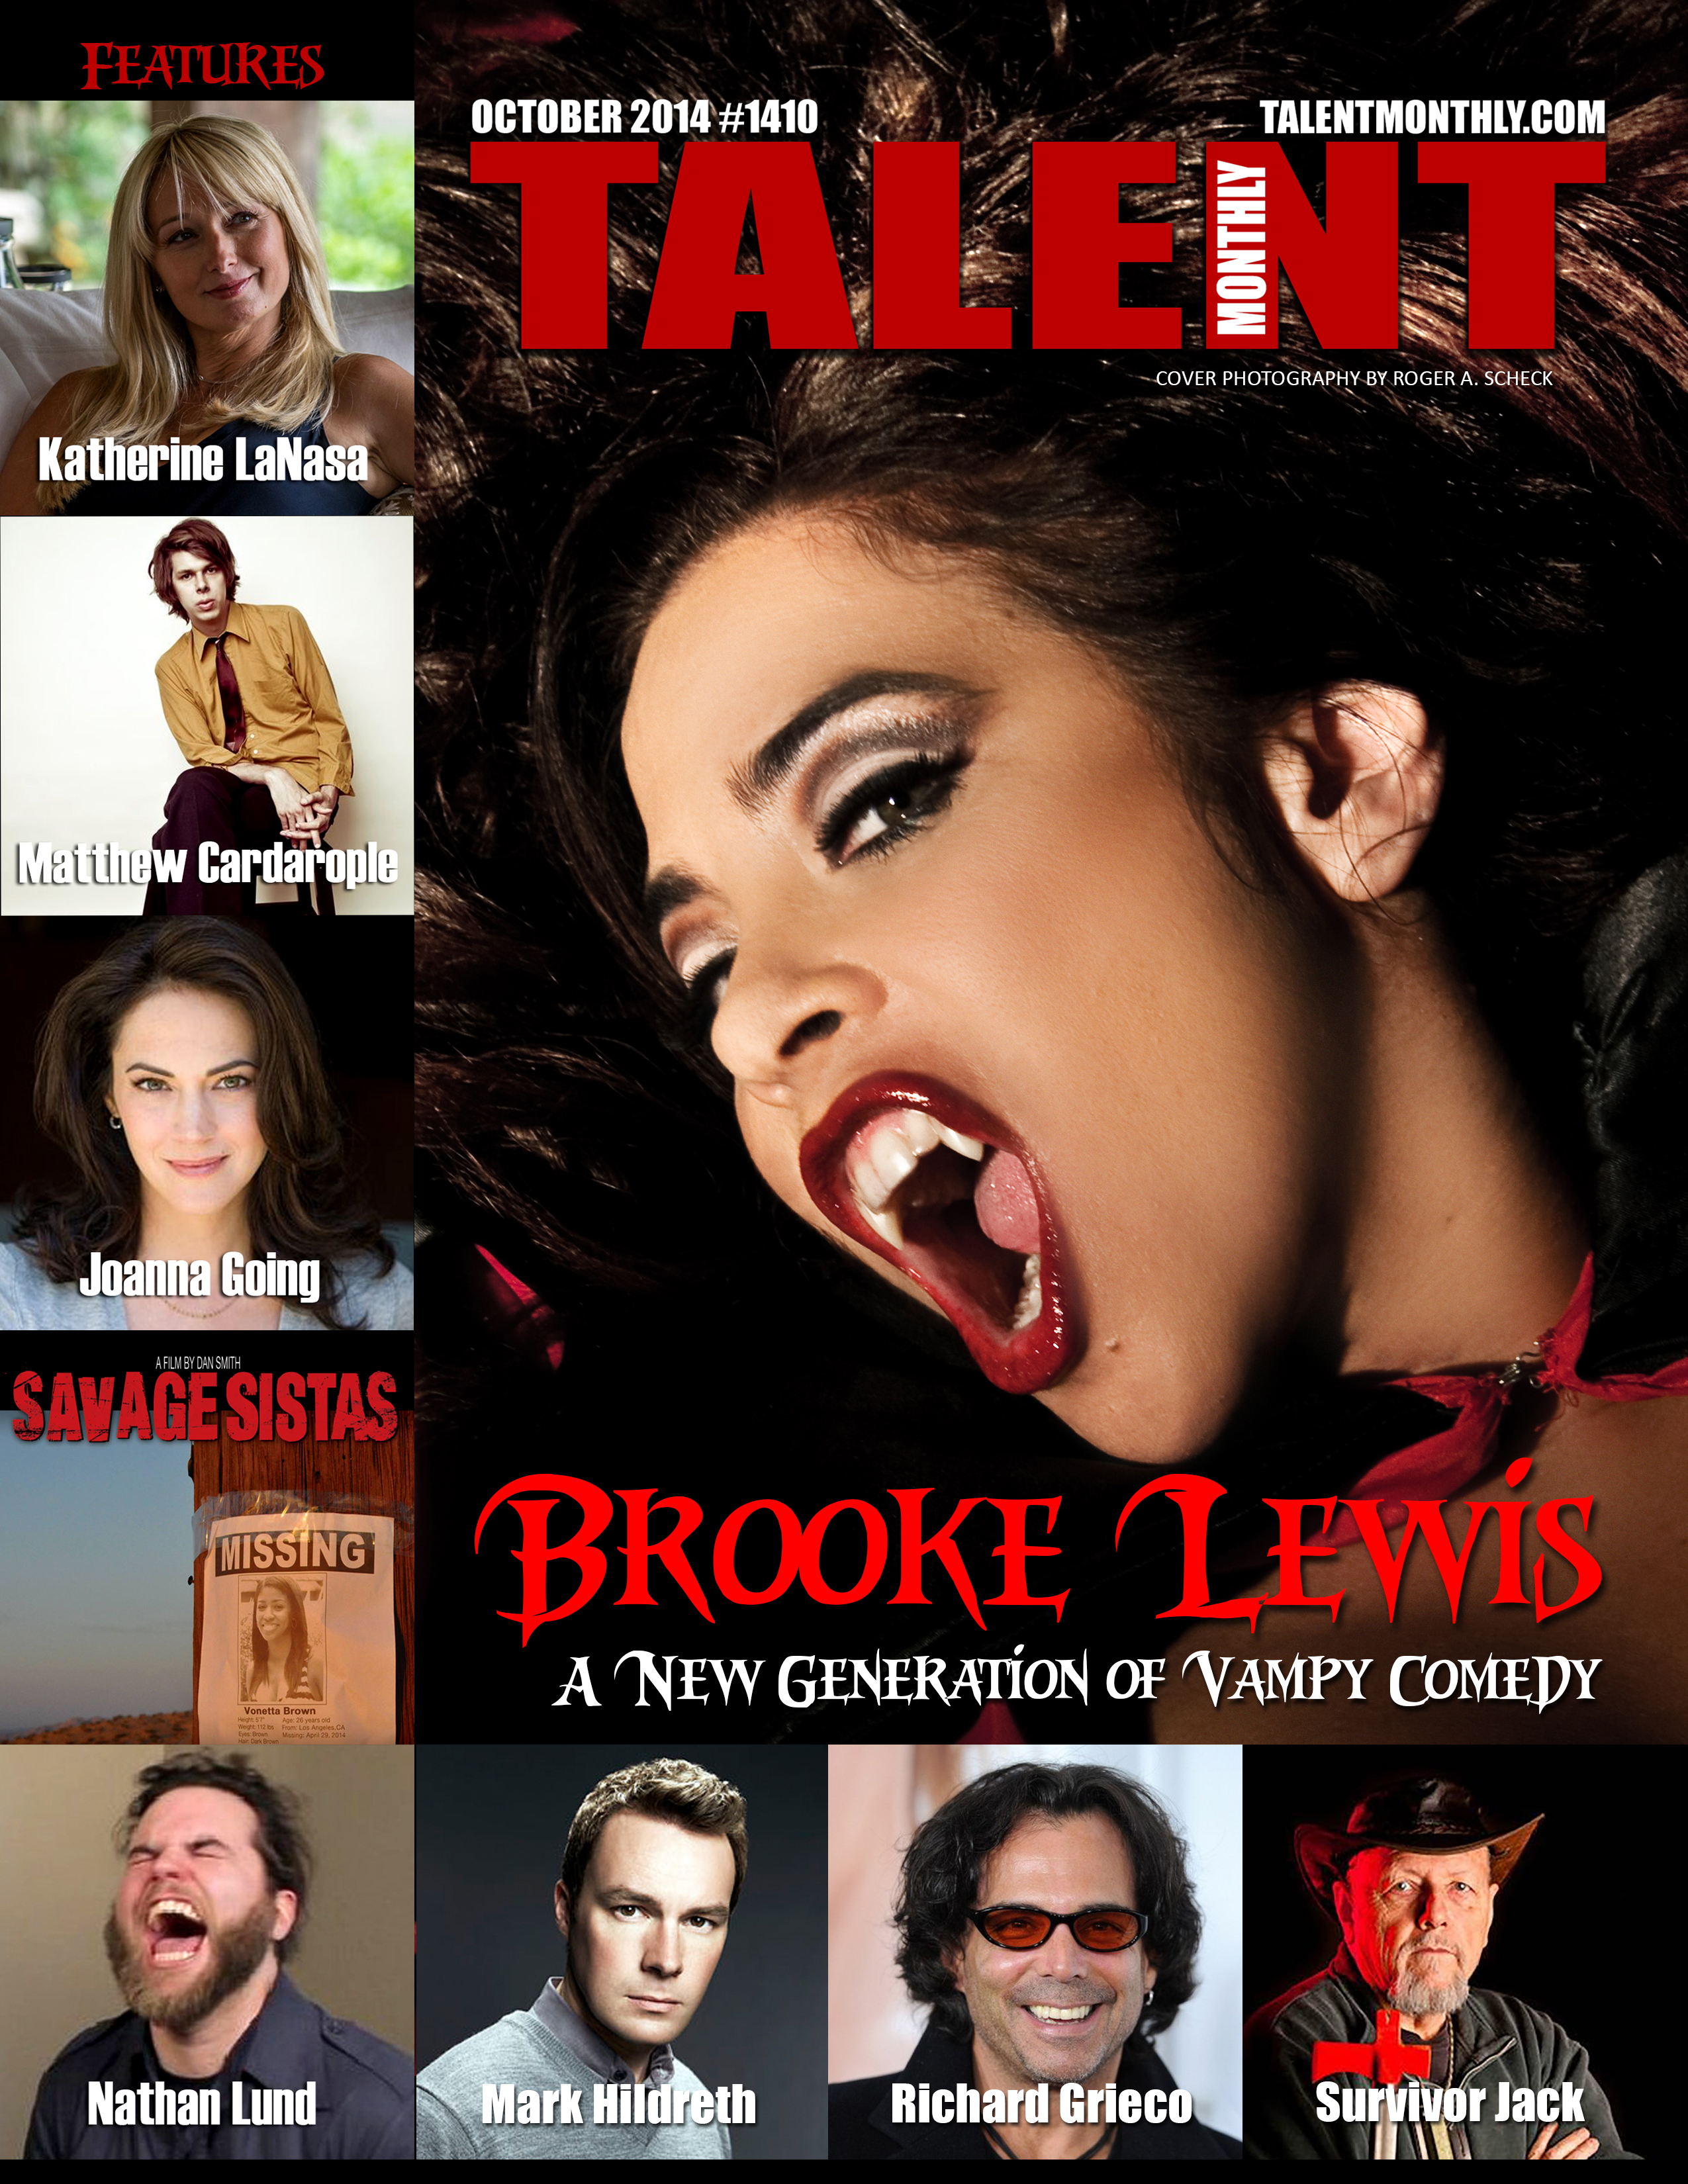 Talent Monthly Magazine- Cover Brooke Lewis